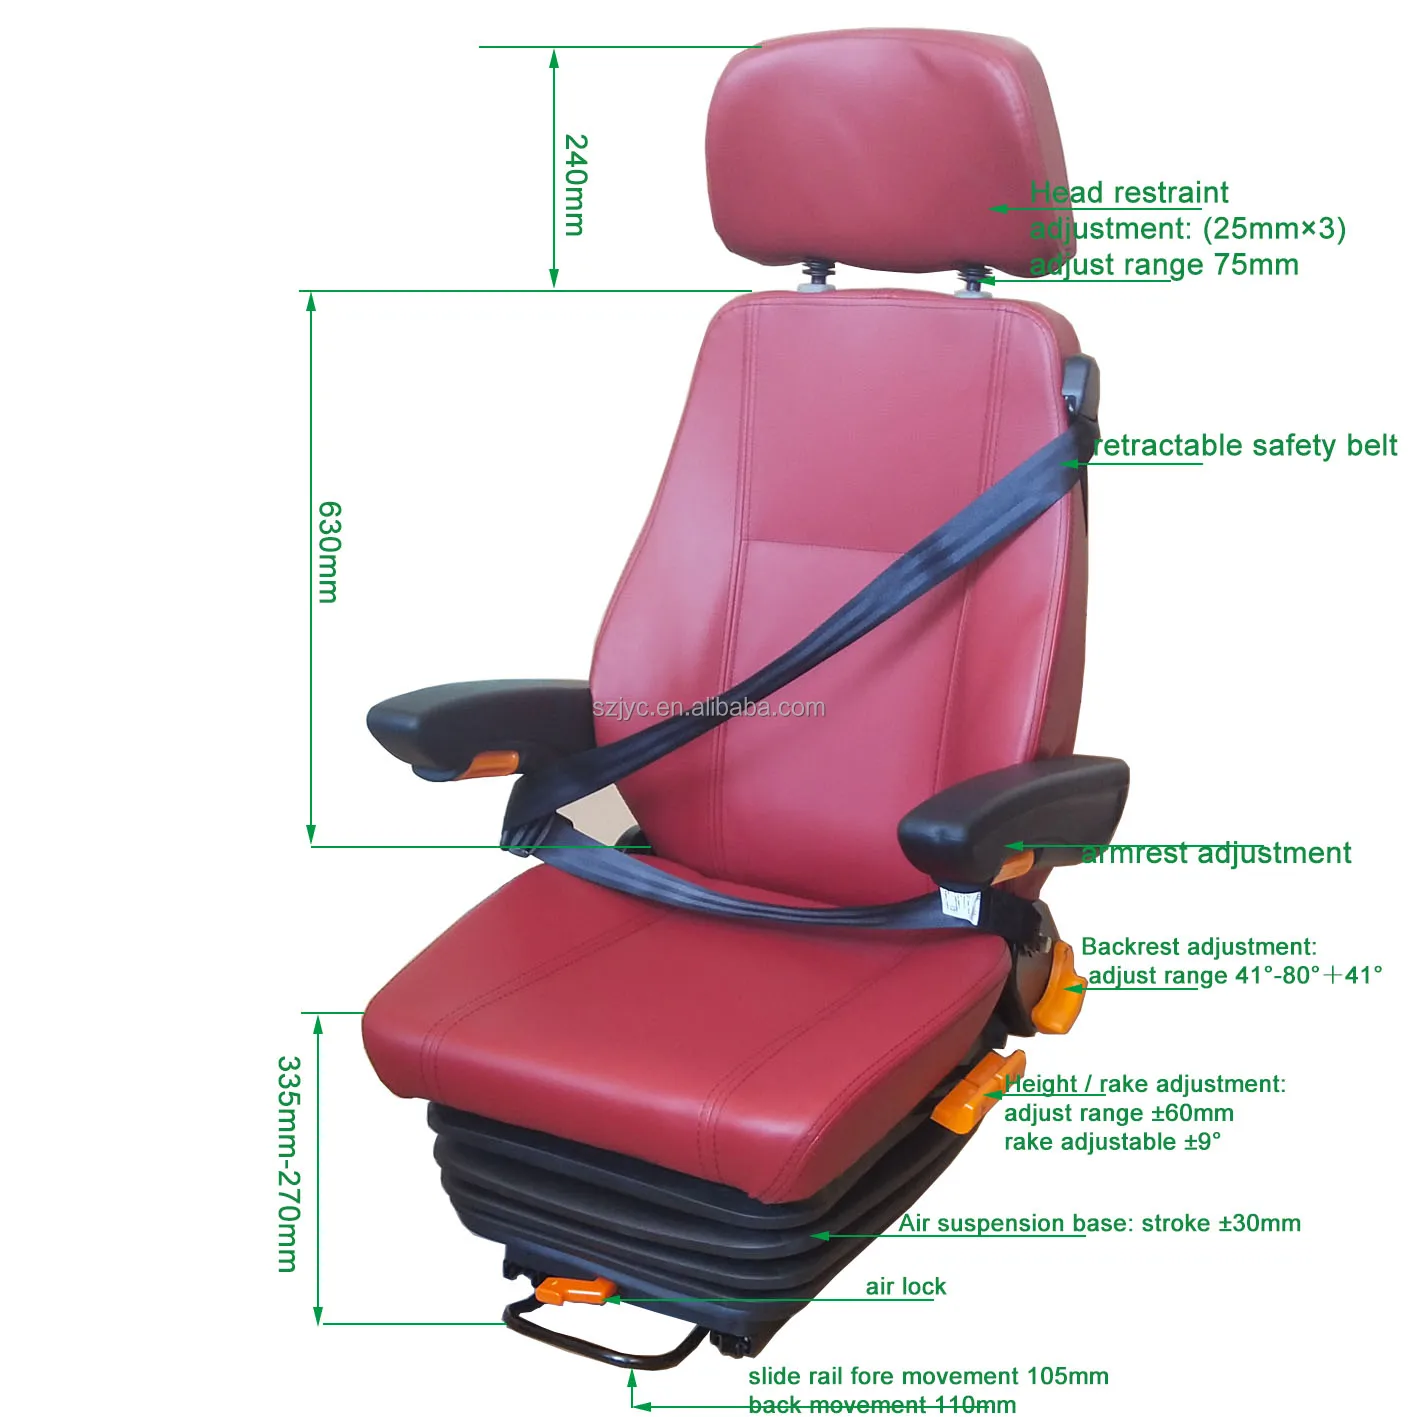 Pneumatic Suspension Bus Driver Seats Selling Hot In Vietnam,Automobile Seat Accessories Driver Seats Parts - Comfortable Truck Driver Seat,Driver Bus Seats For Sale,Neumatic Suspension Bus Driver Product on Alibaba.com